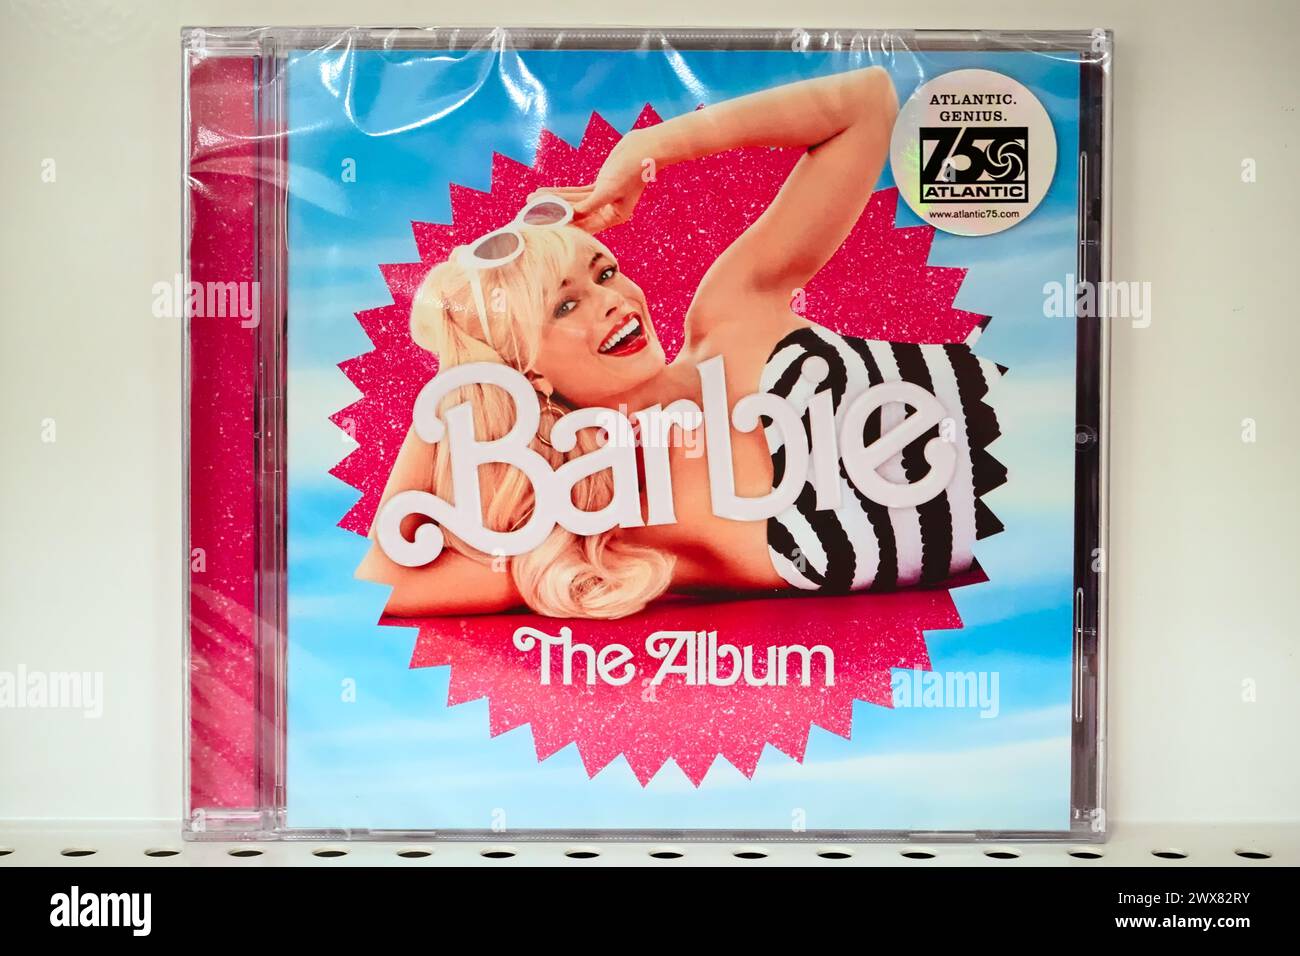 New York, NY - March 21, 2024: Barbie the Album, Barbie film soundtrack music CD cover on display at retail store. Stock Photo